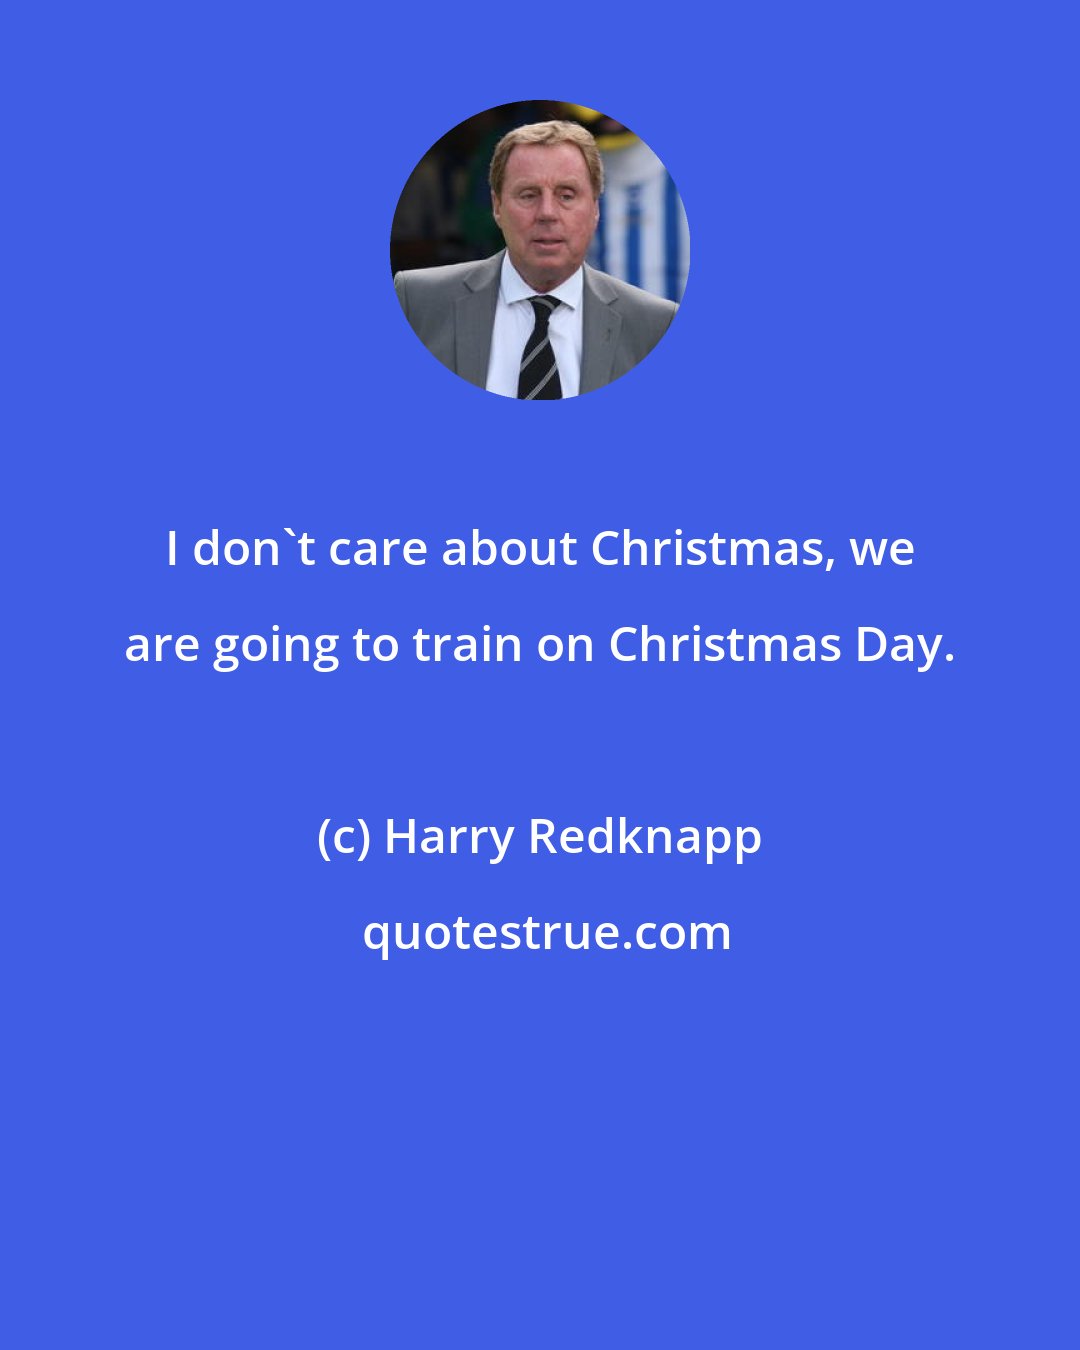 Harry Redknapp: I don't care about Christmas, we are going to train on Christmas Day.